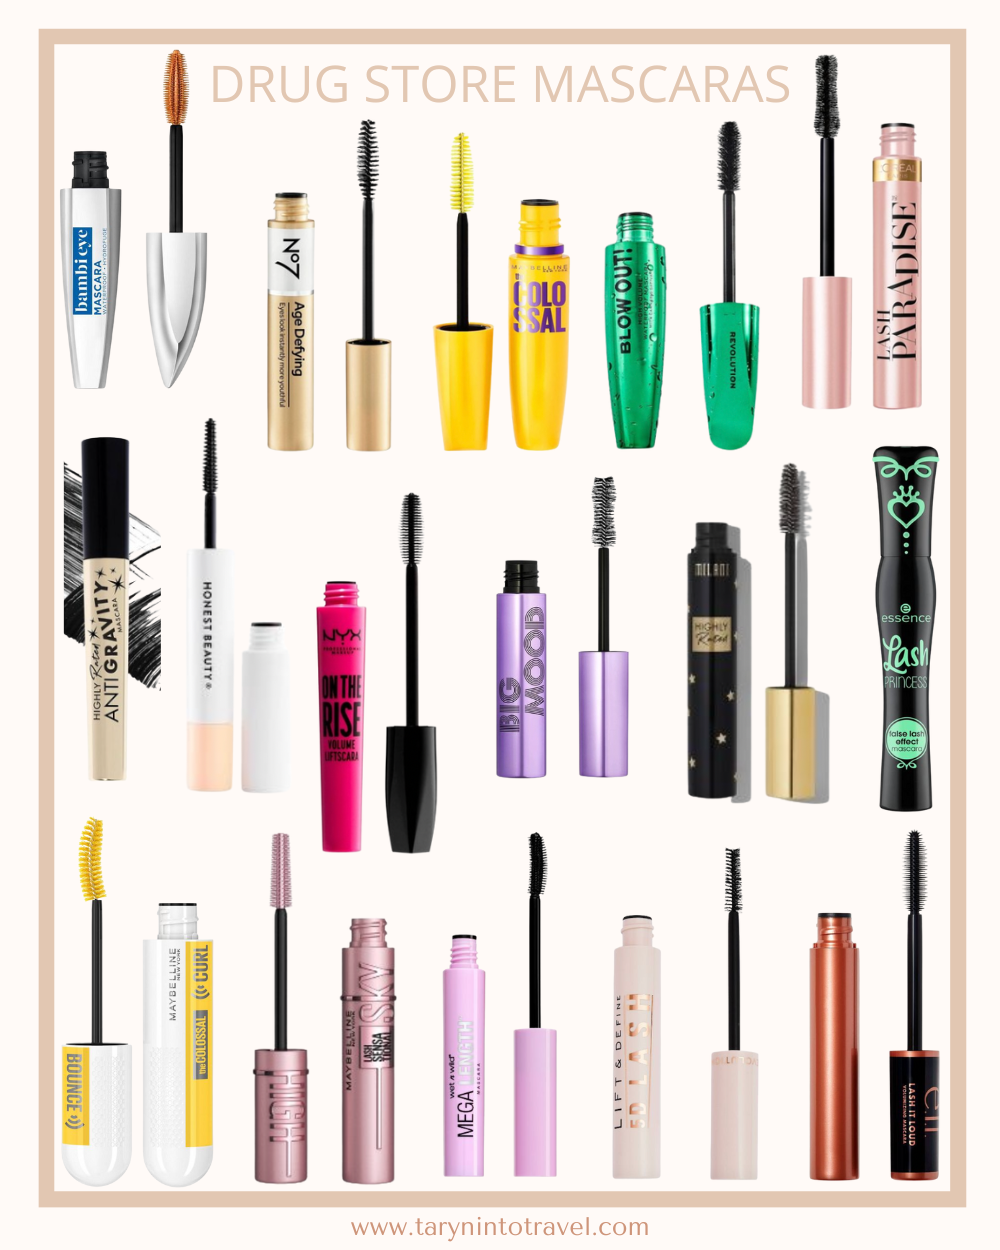 10 Mascara Reviews: From Drugstore to High End